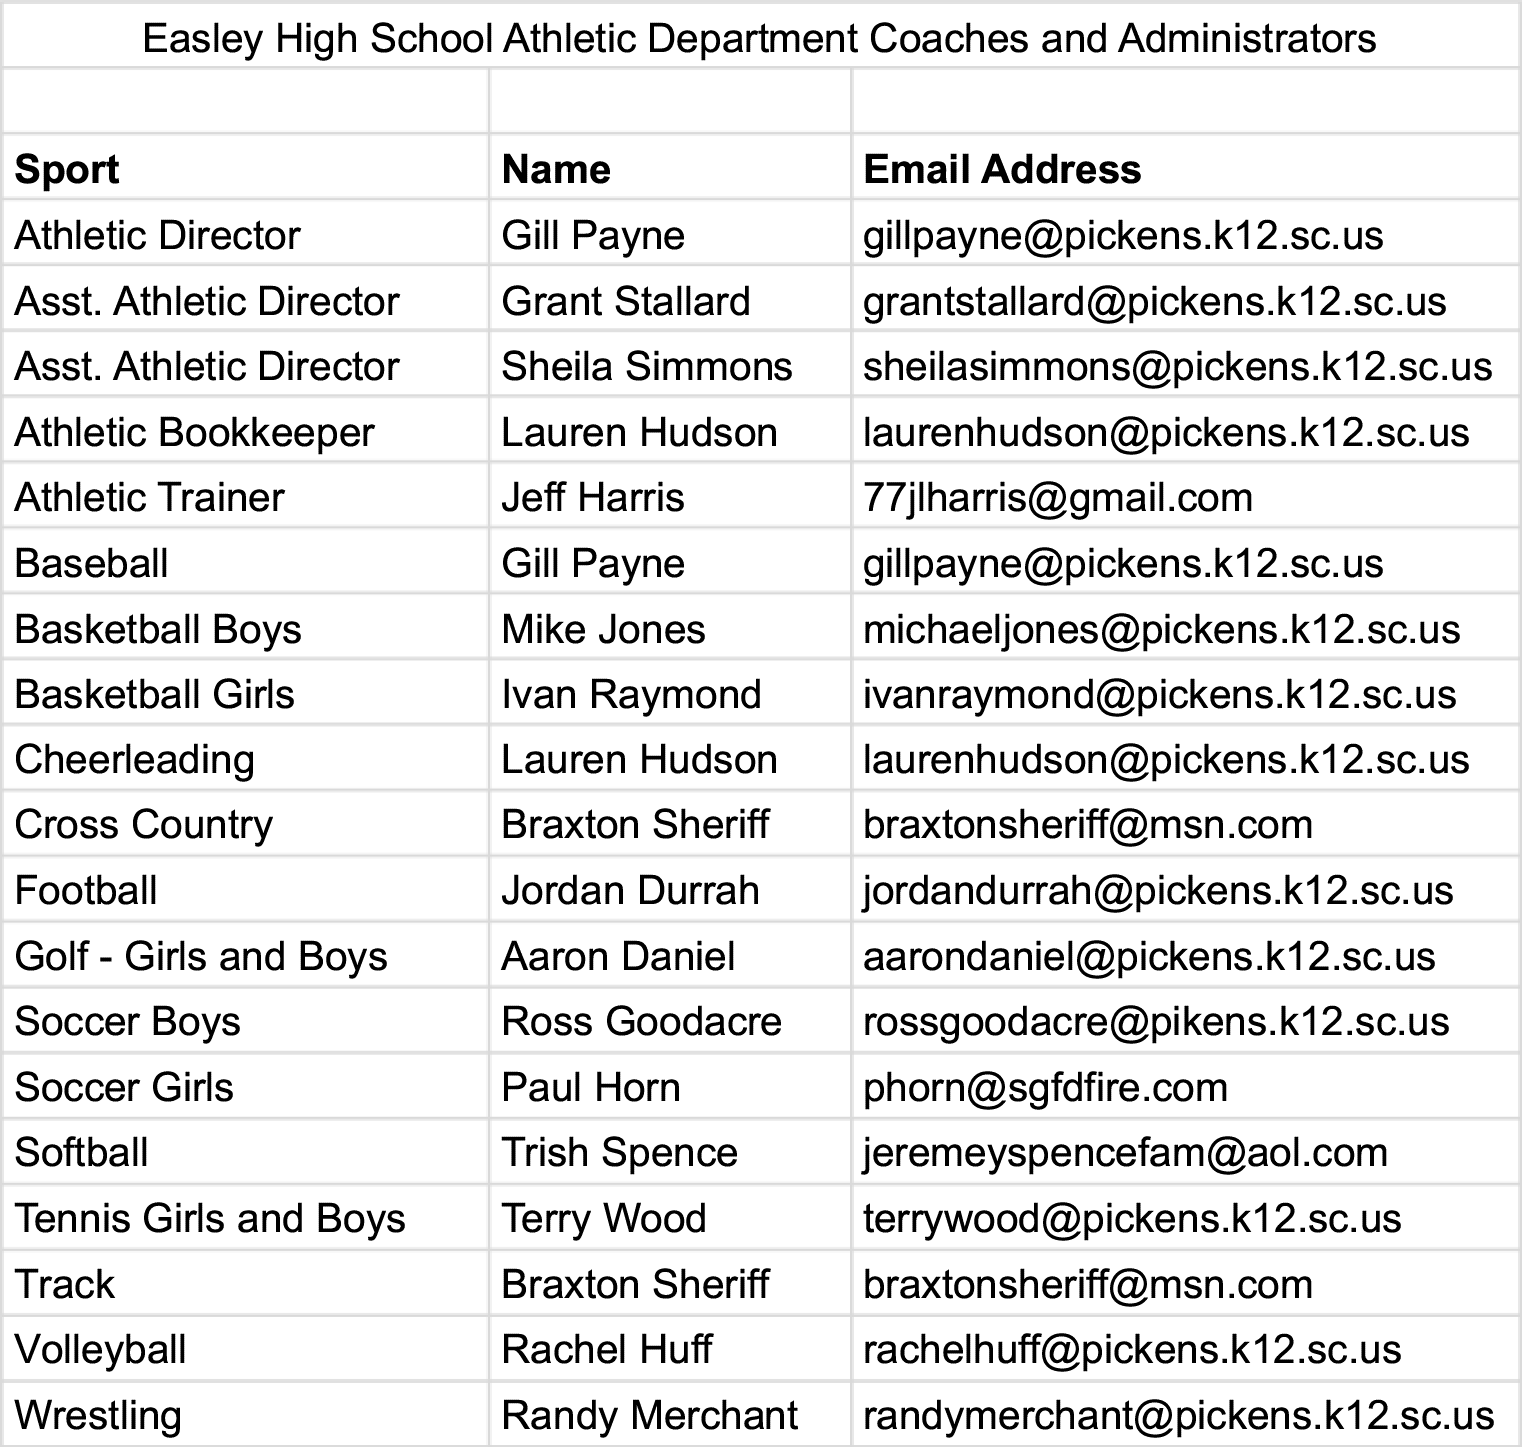 EHS Athletic Department Coaching and Administration Directory